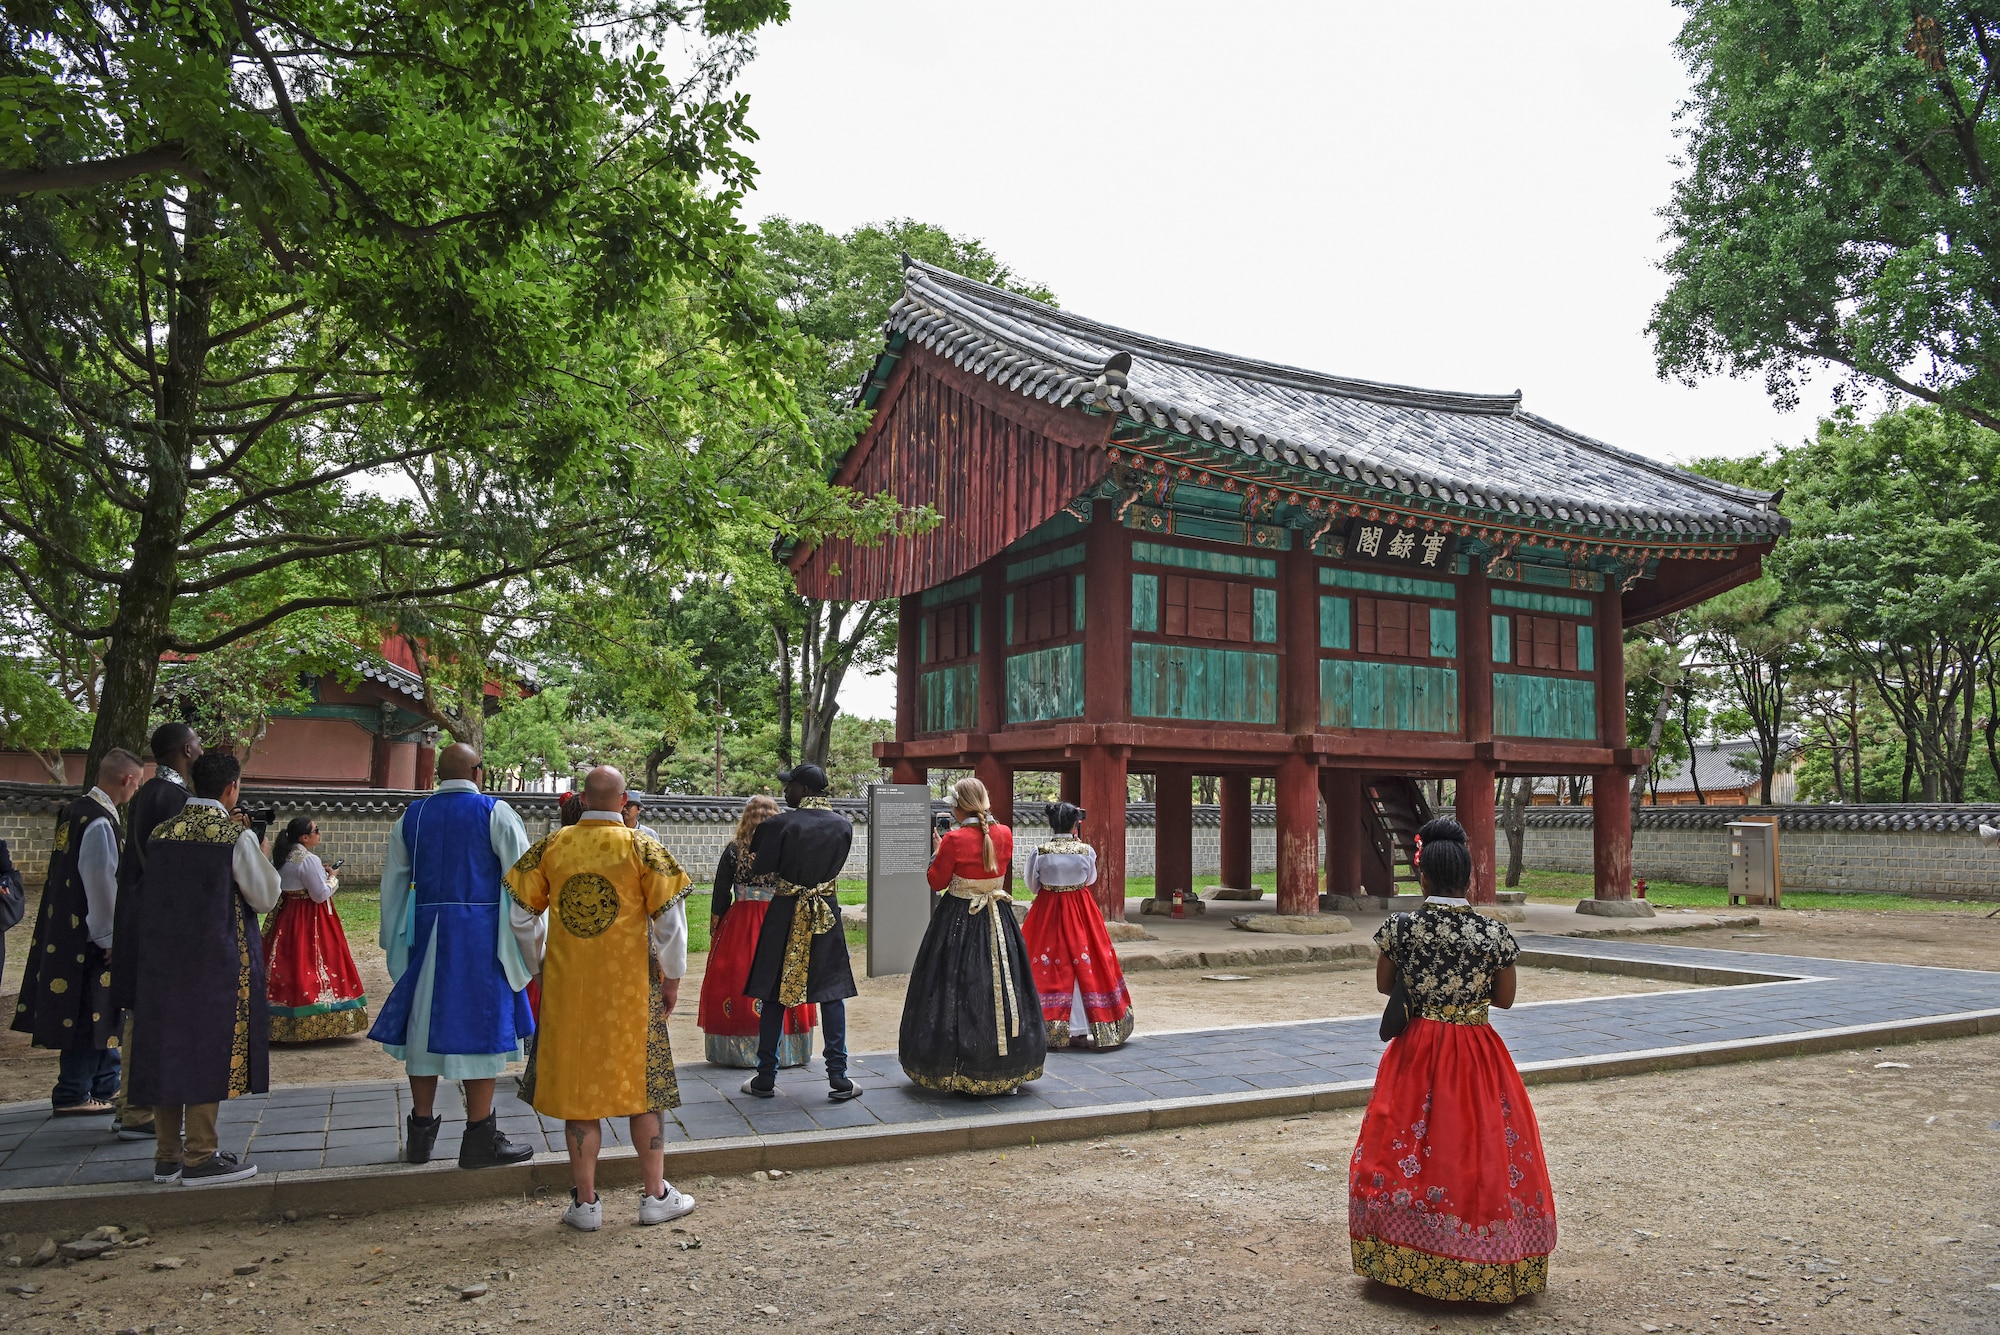 U.S. service members stationed around the Korean Peninsula wear traditional Korean clothing while exploring Jeonju traditional village, Republic of Korea, July 9, 2019. More than 50 Soldiers, Marines and Airmen participated in the three-day tour hosted by the Ministry of National Defense. (U.S. Air Force photo by Staff Sgt. Mackenzie Mendez)